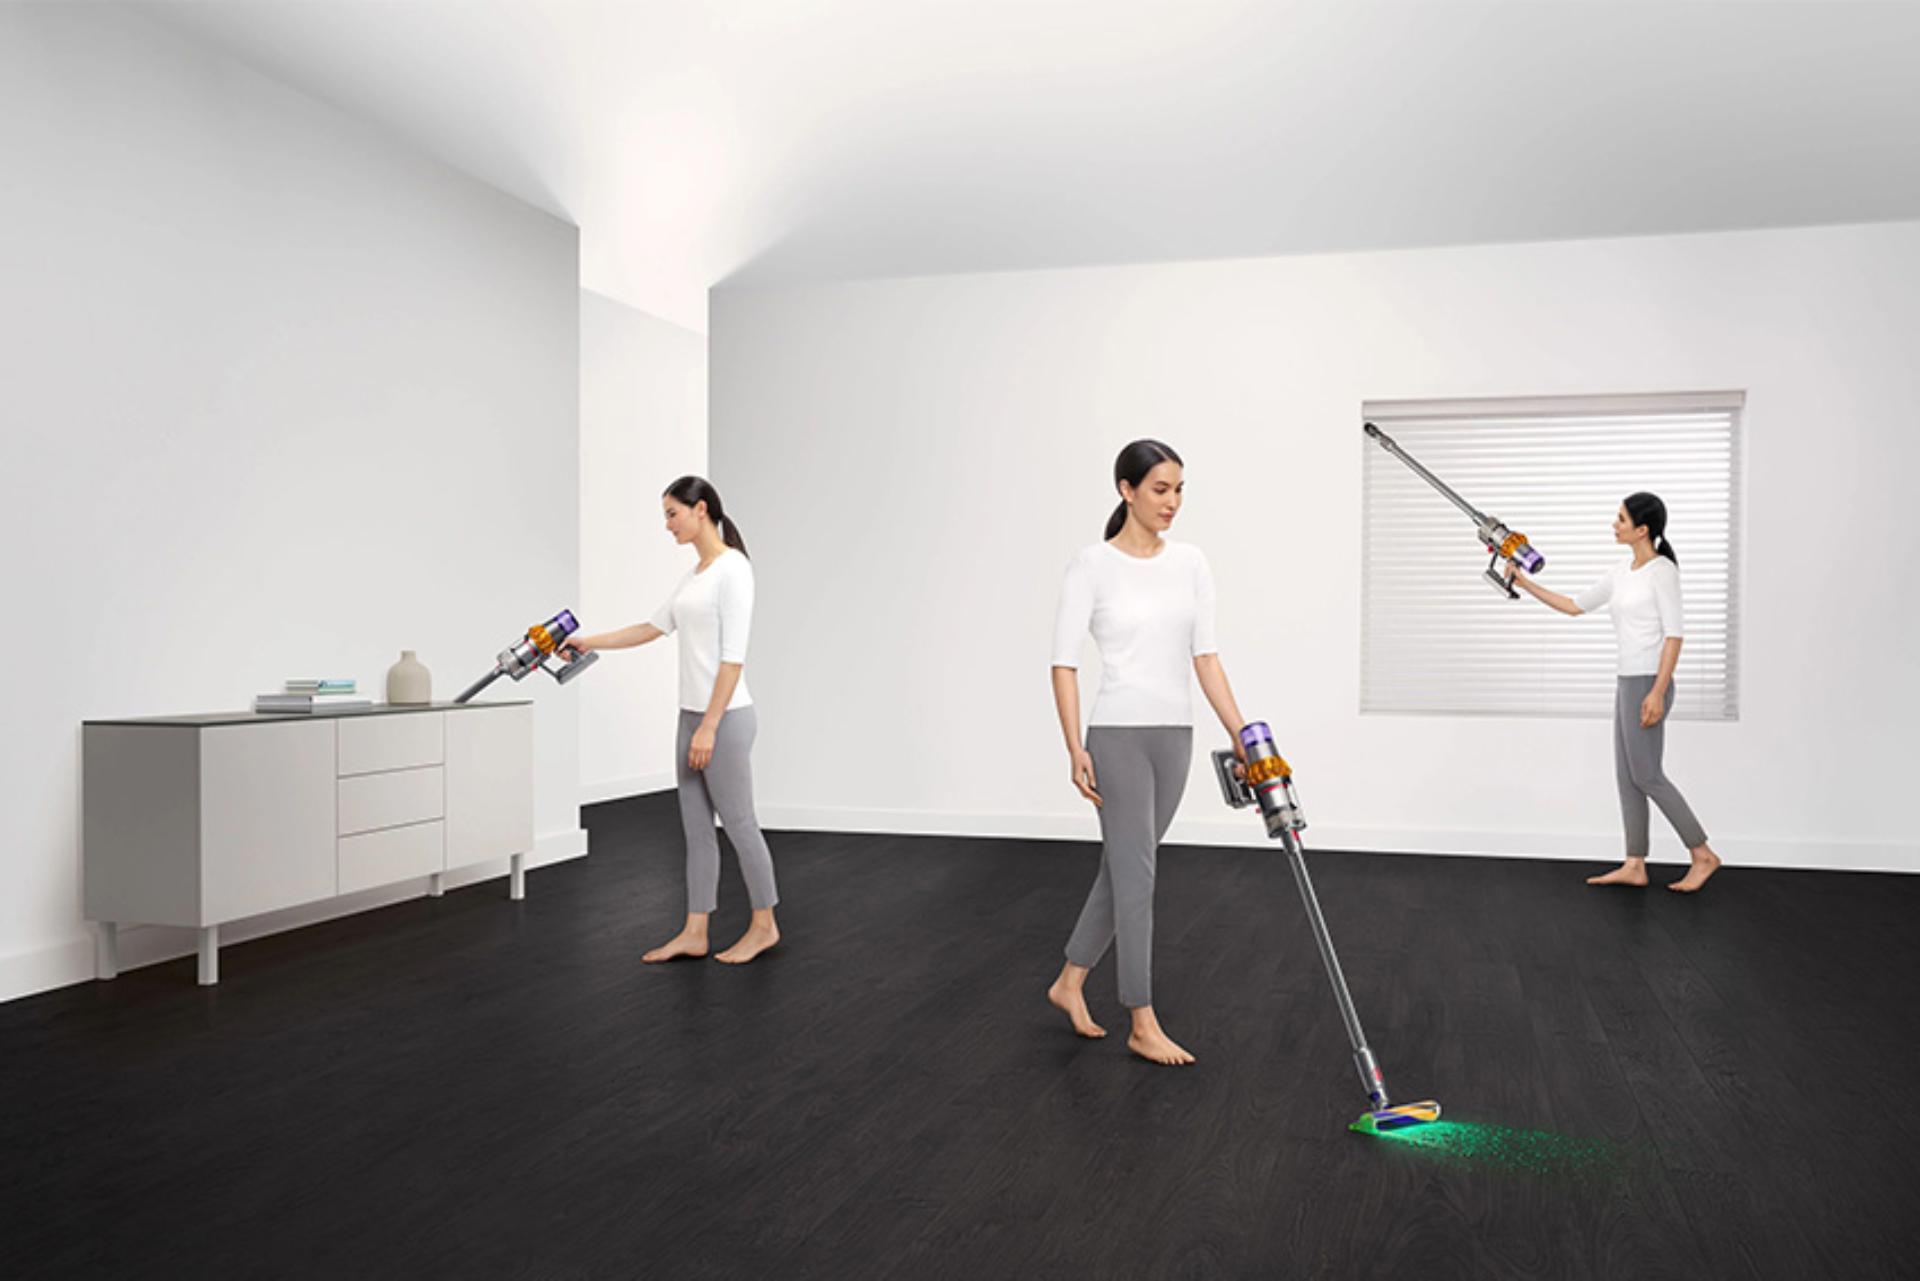 Dyson vacuum being used to clean room